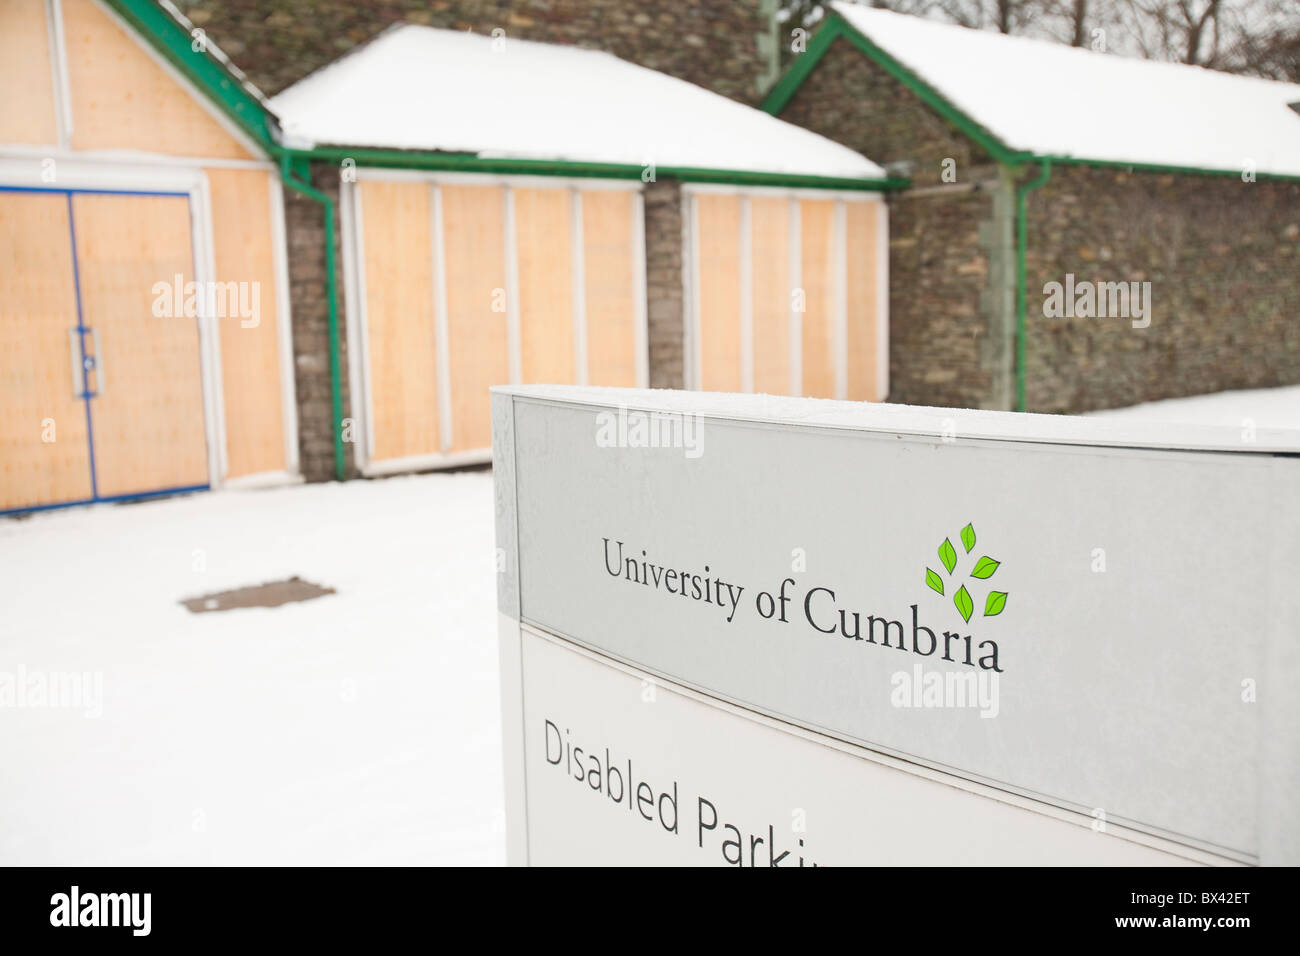 The Kelsick campus of the University of Cumbria boarded up and abandoned due to spending cuts, Ambleside, UK. Stock Photo